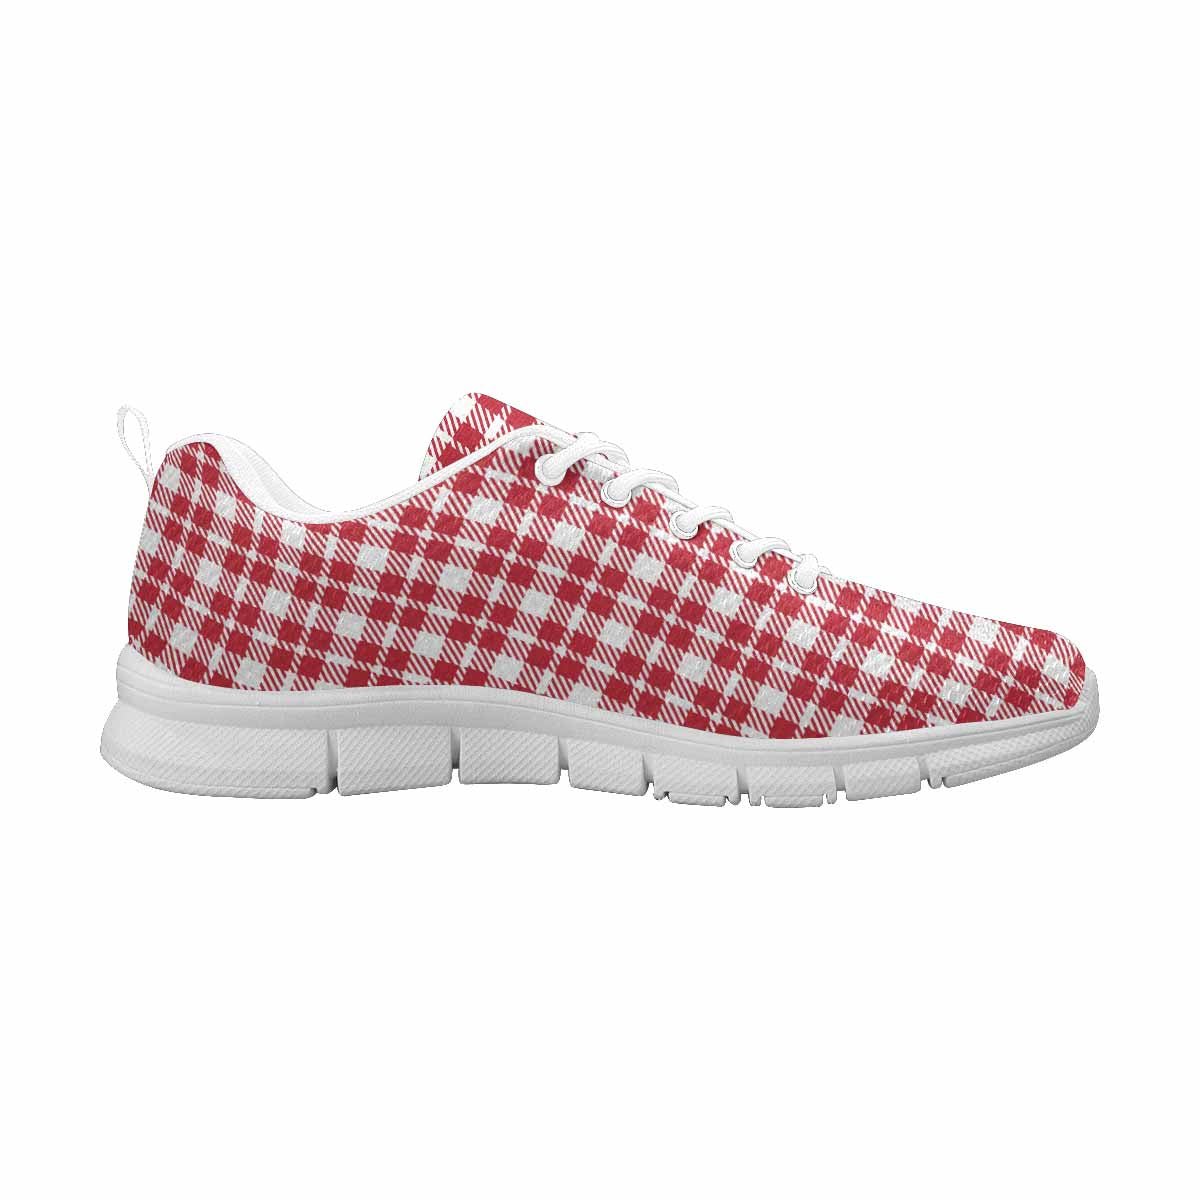 Uniquely You Sneakers for Men, Buffalo Plaid Red and White - Running - KRE Prime Deals